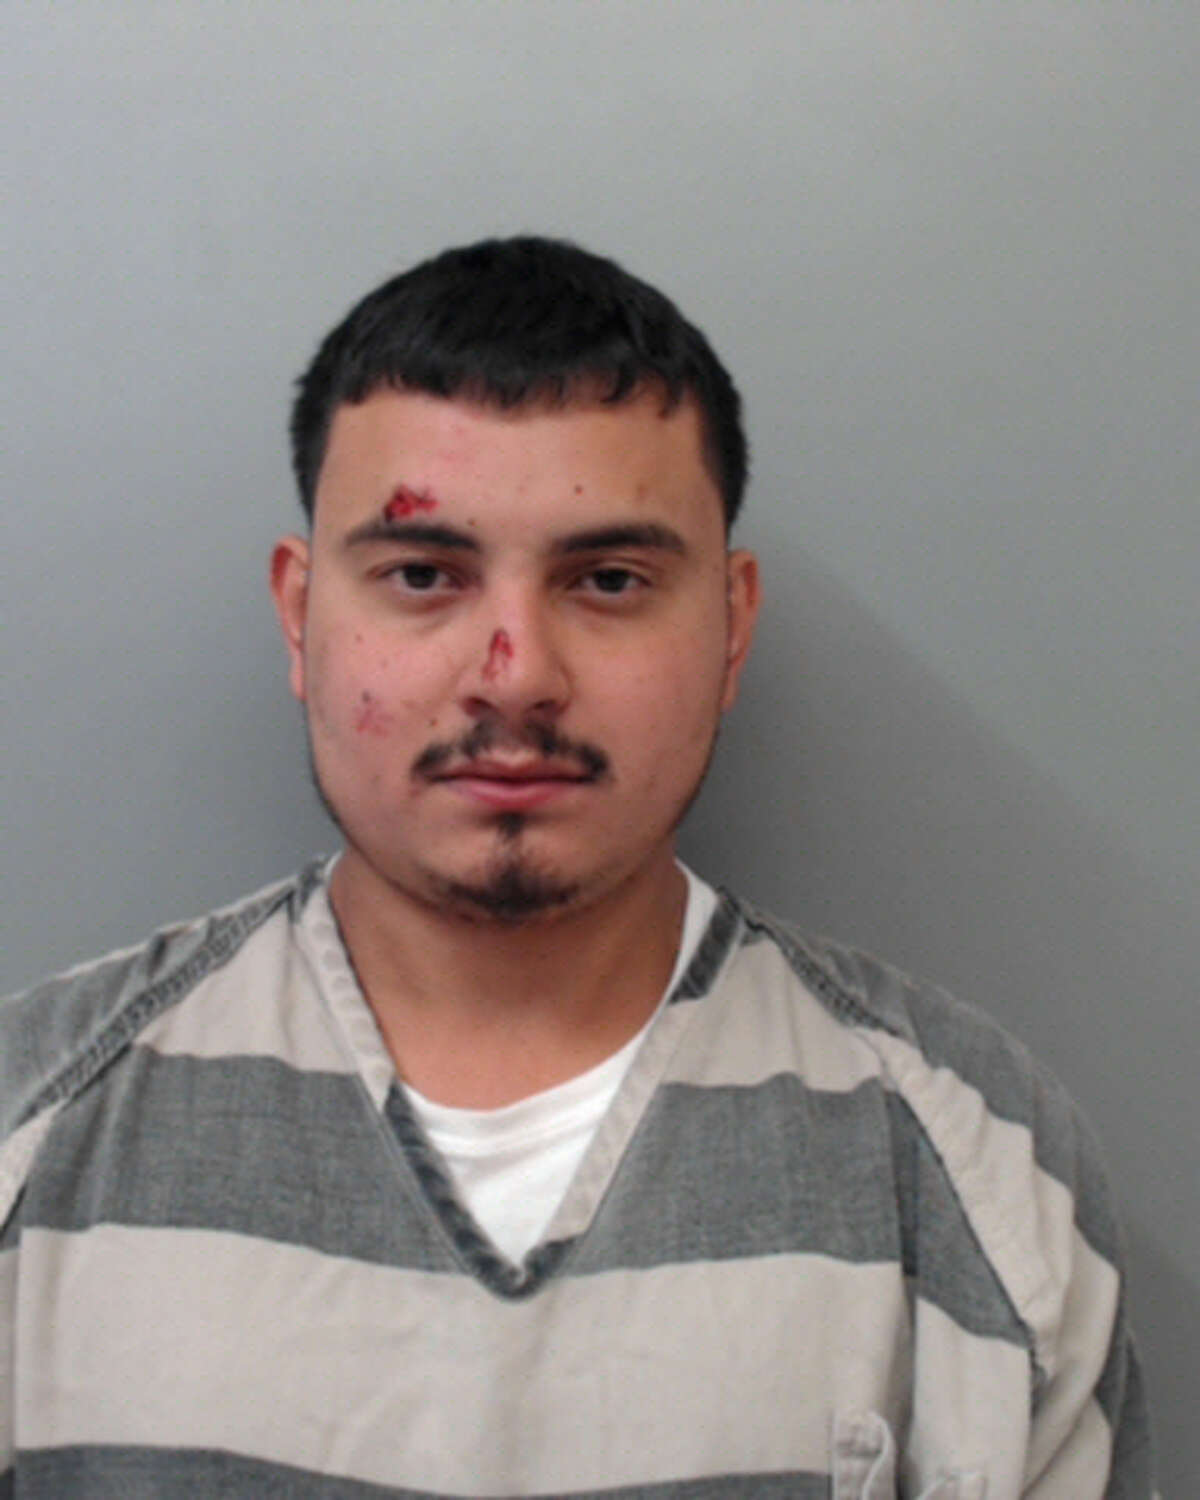 Jose Julian Longoria, 24, was charged with second-degree felony possession of marijuana and evading arrest.